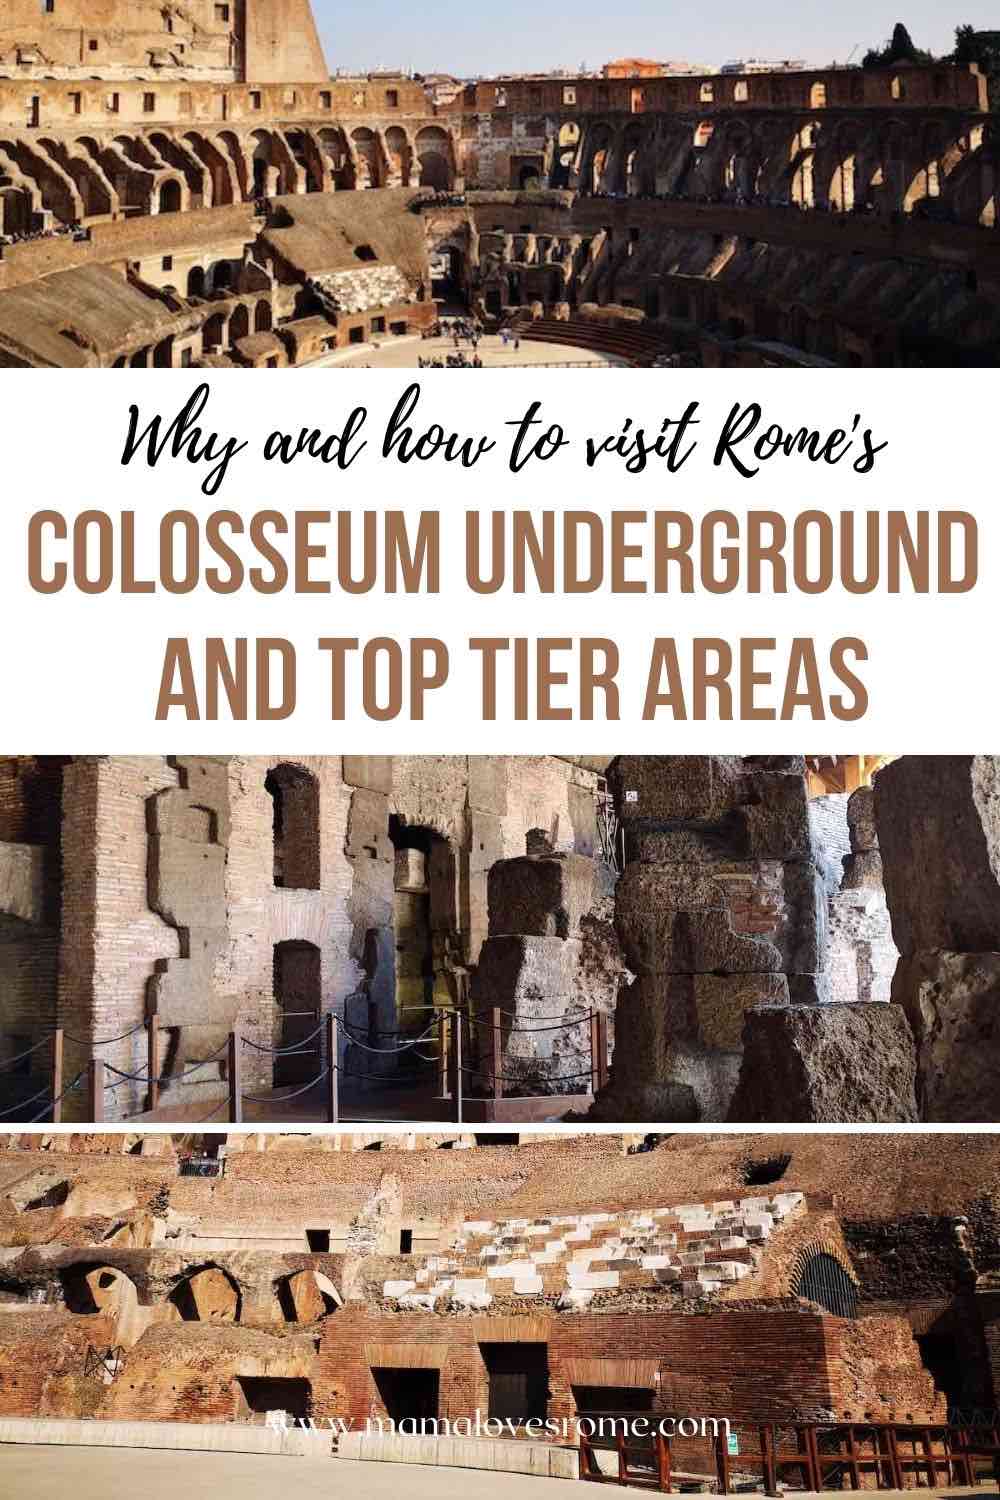 3 photos of Colosseum top floor, underground area and arena floor with text: why and how to visit Rome's Colosseum underground and top tier areas